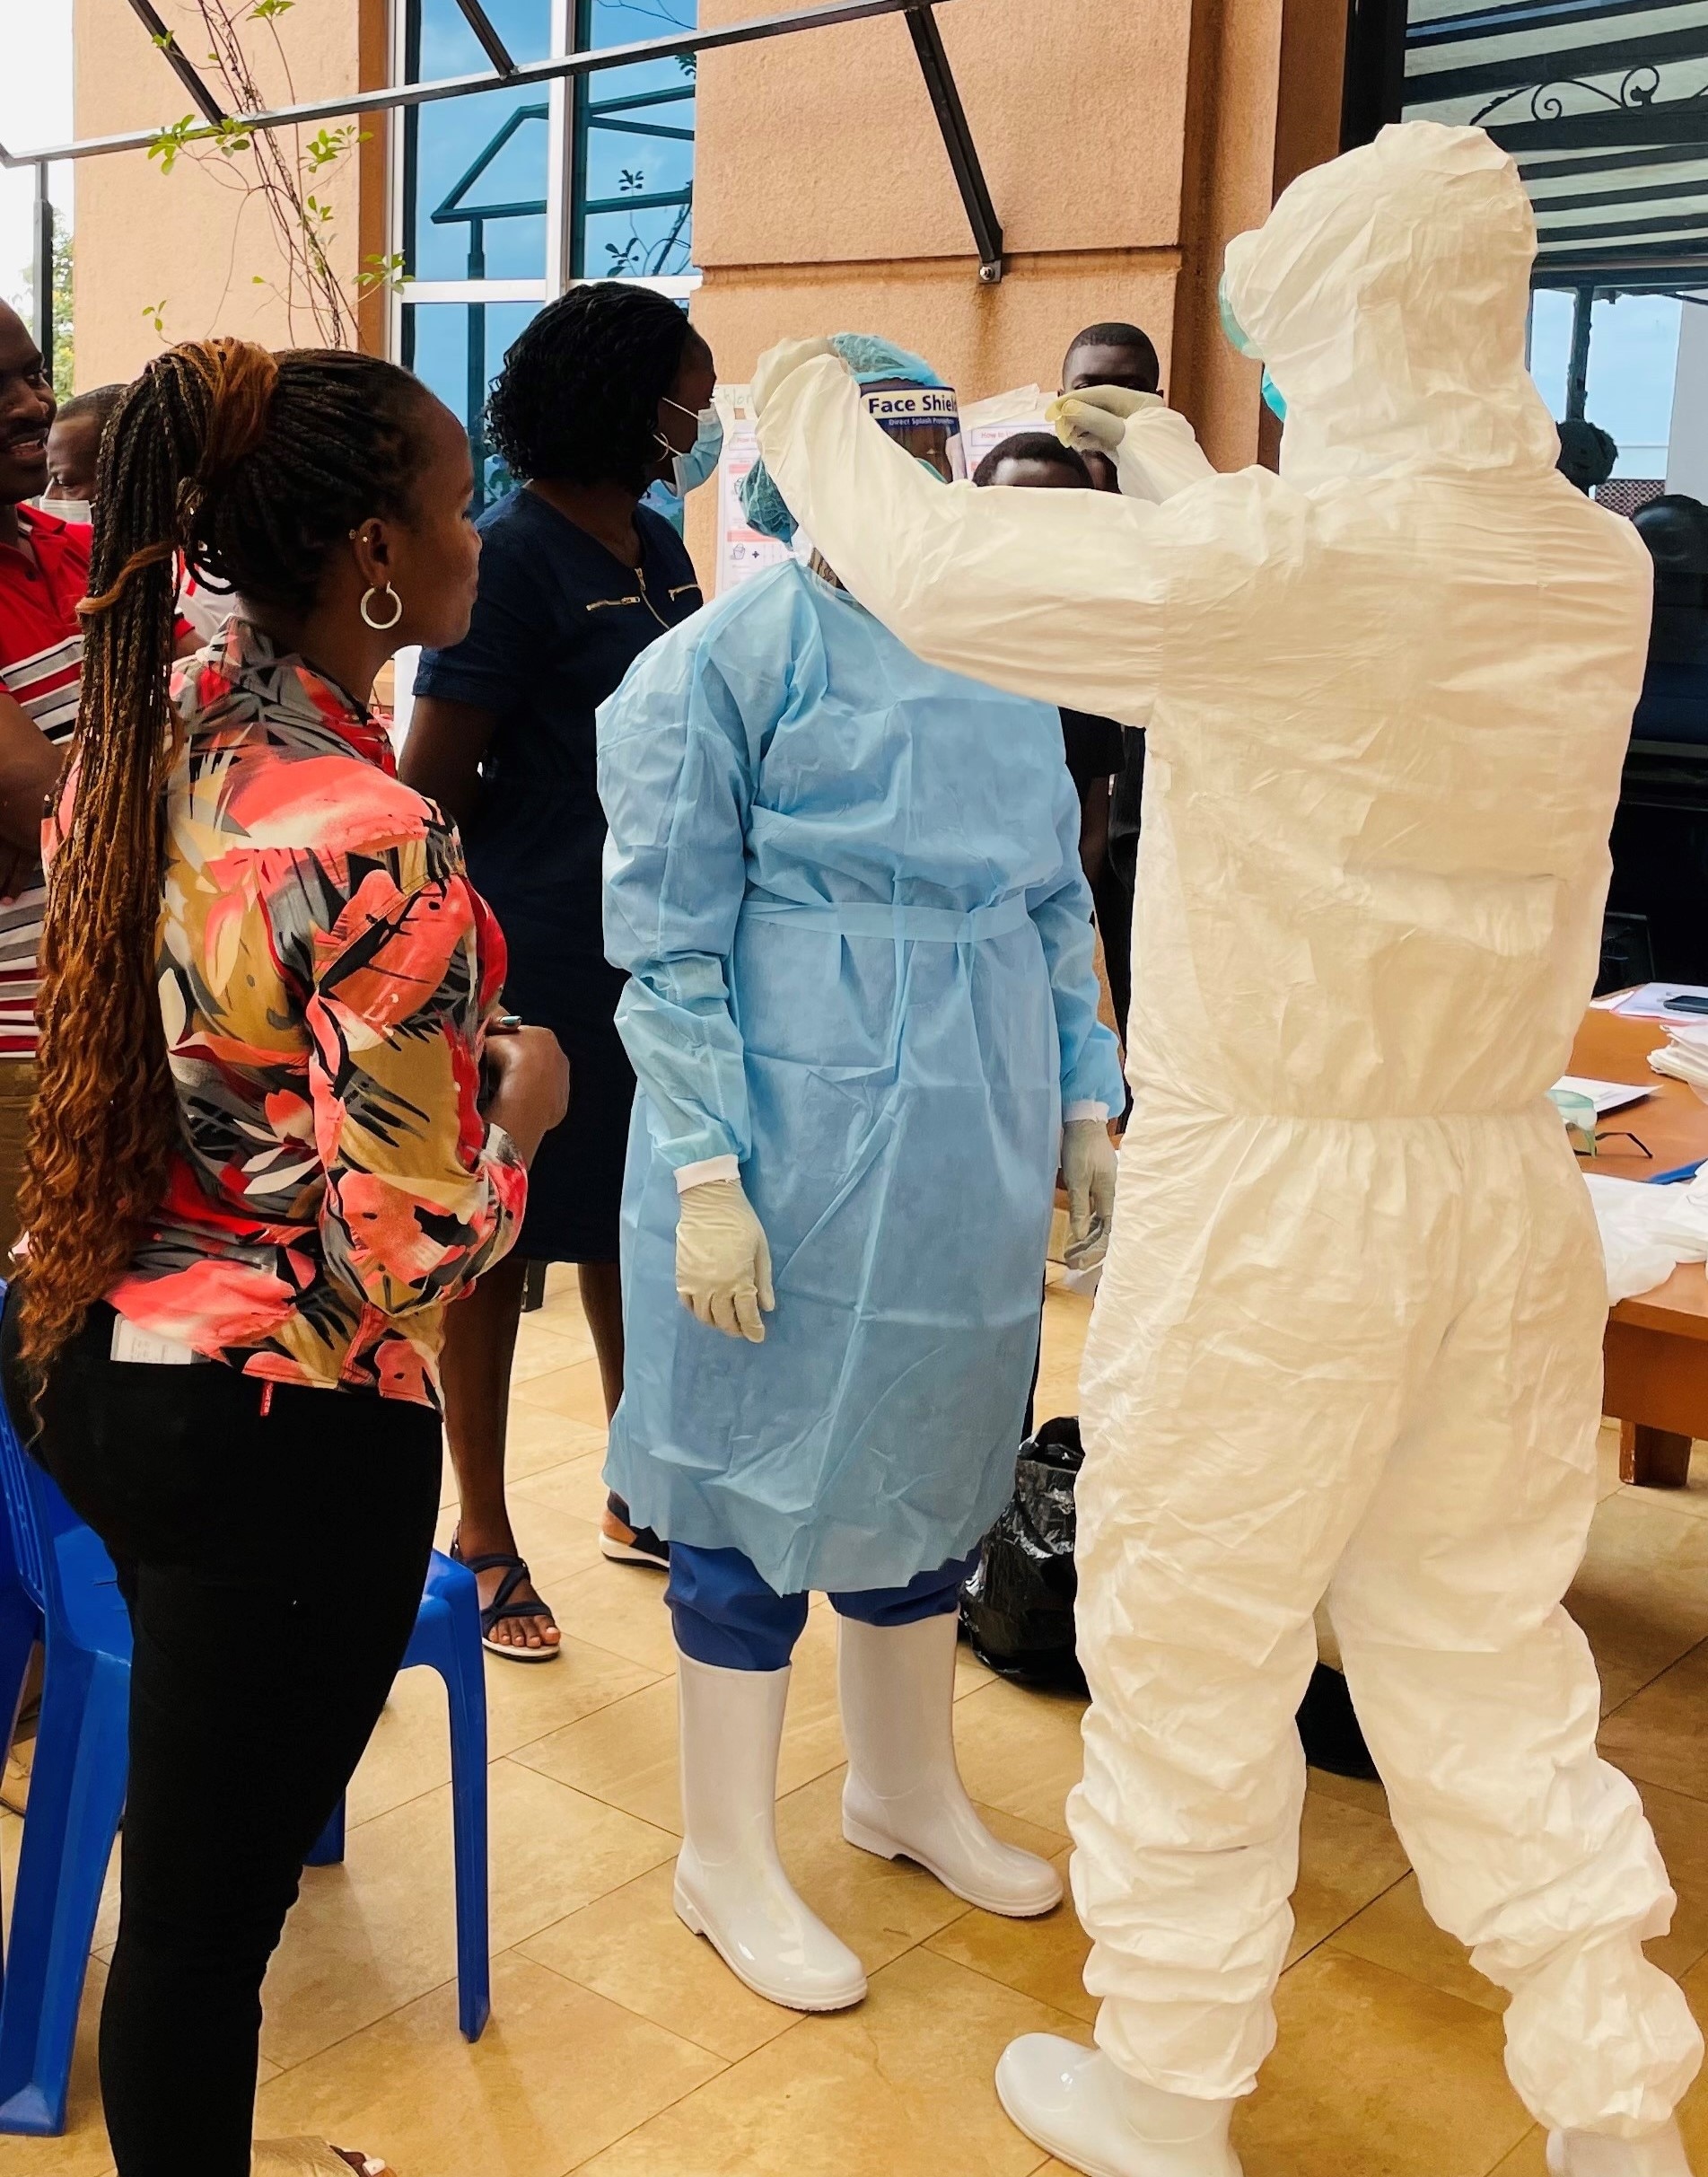 Healthcare workers donning PPE in a training